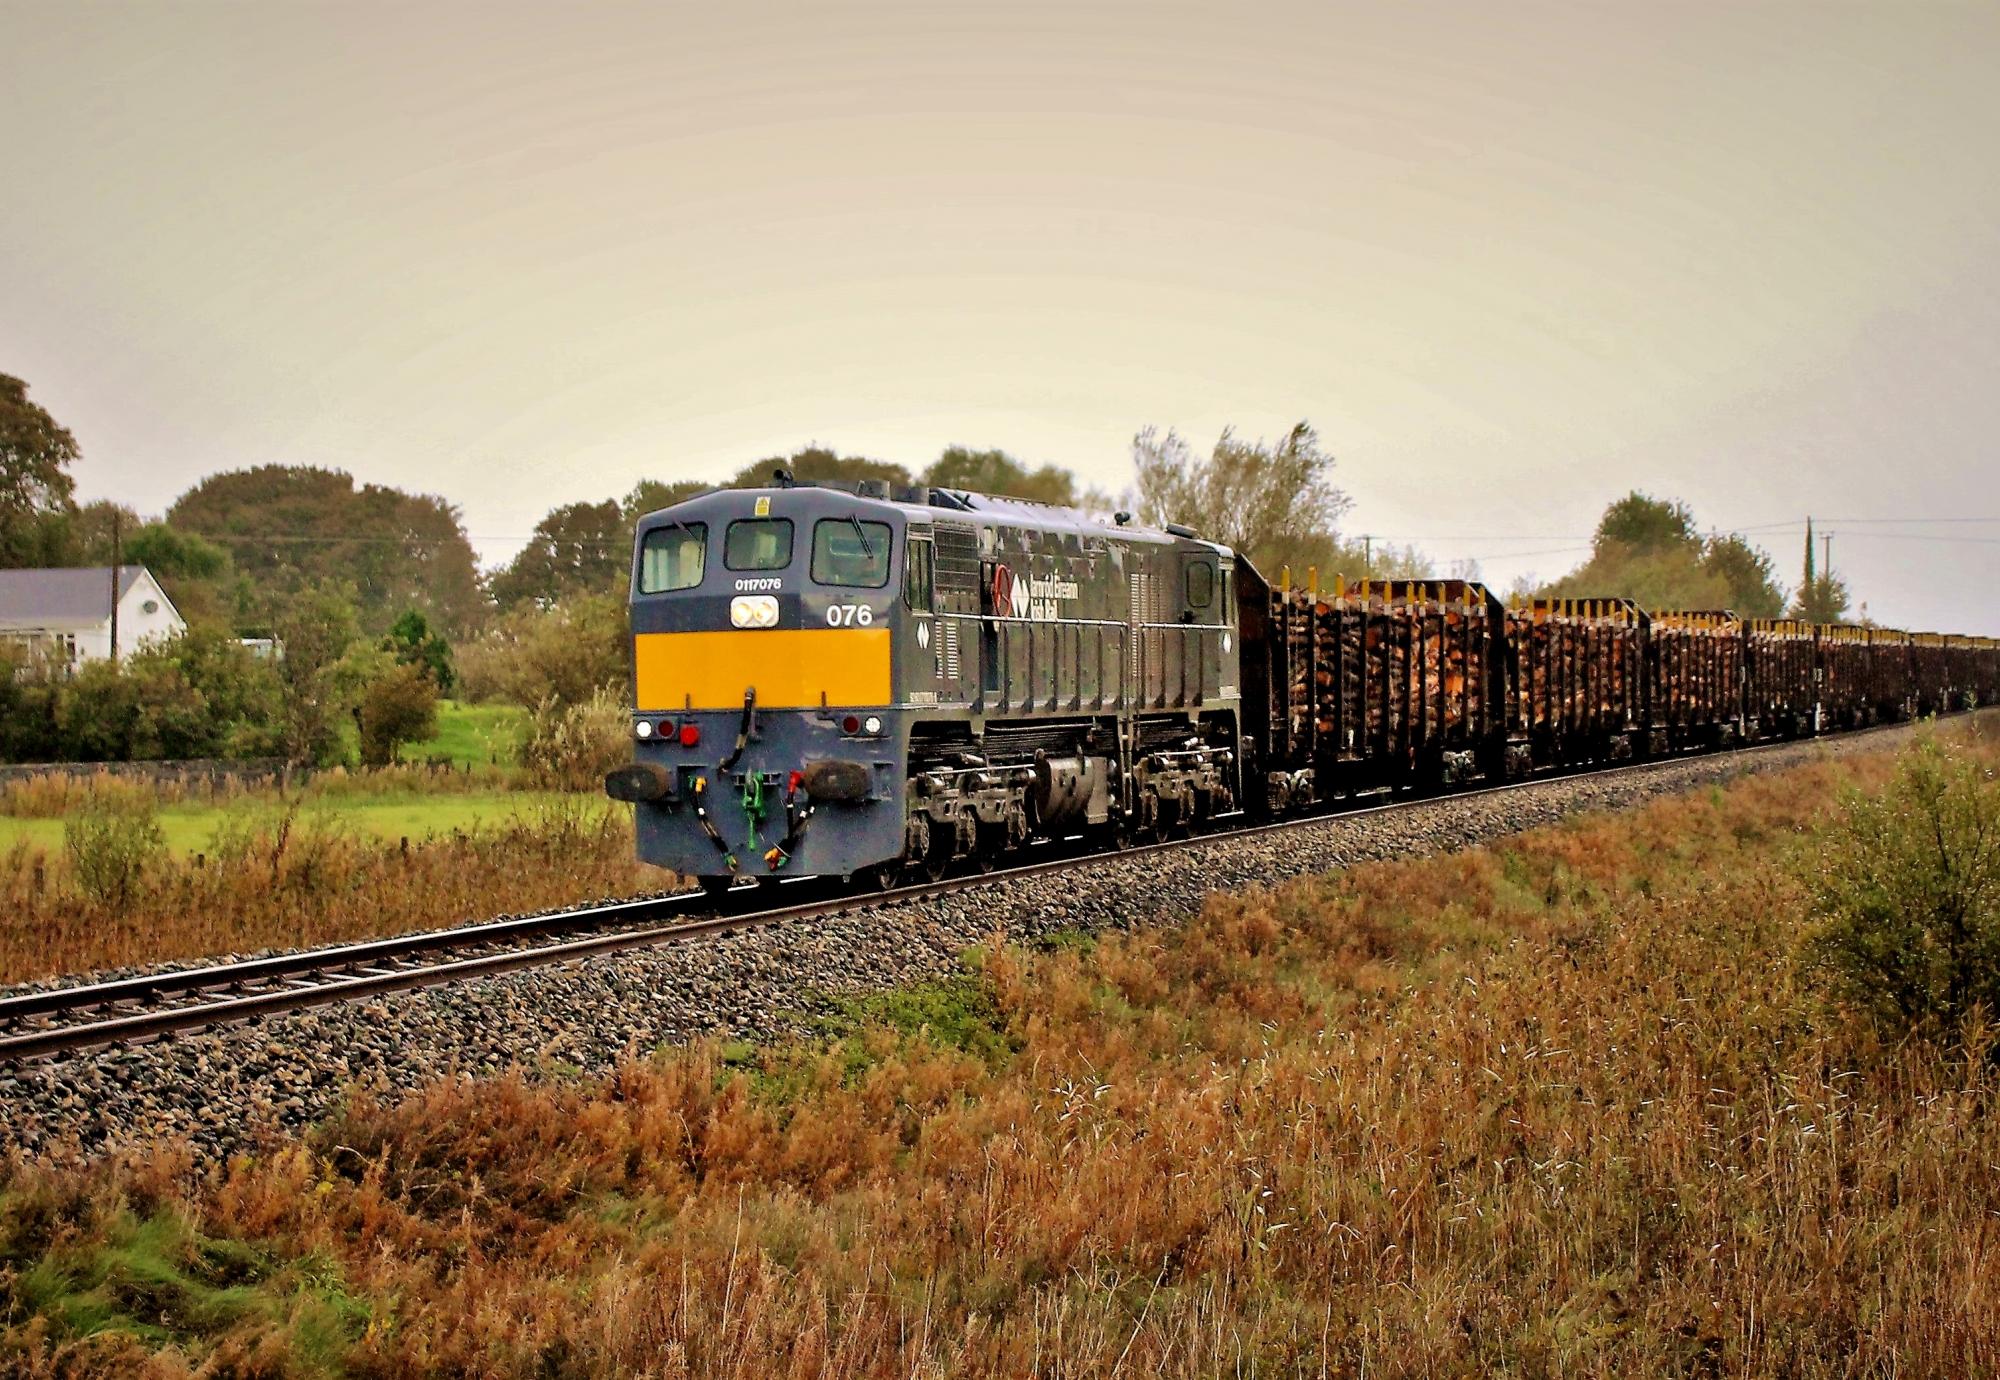 Iarnród Éireann and DIGAS to trial Europe's first retrofitted hydrogen freight locomotive